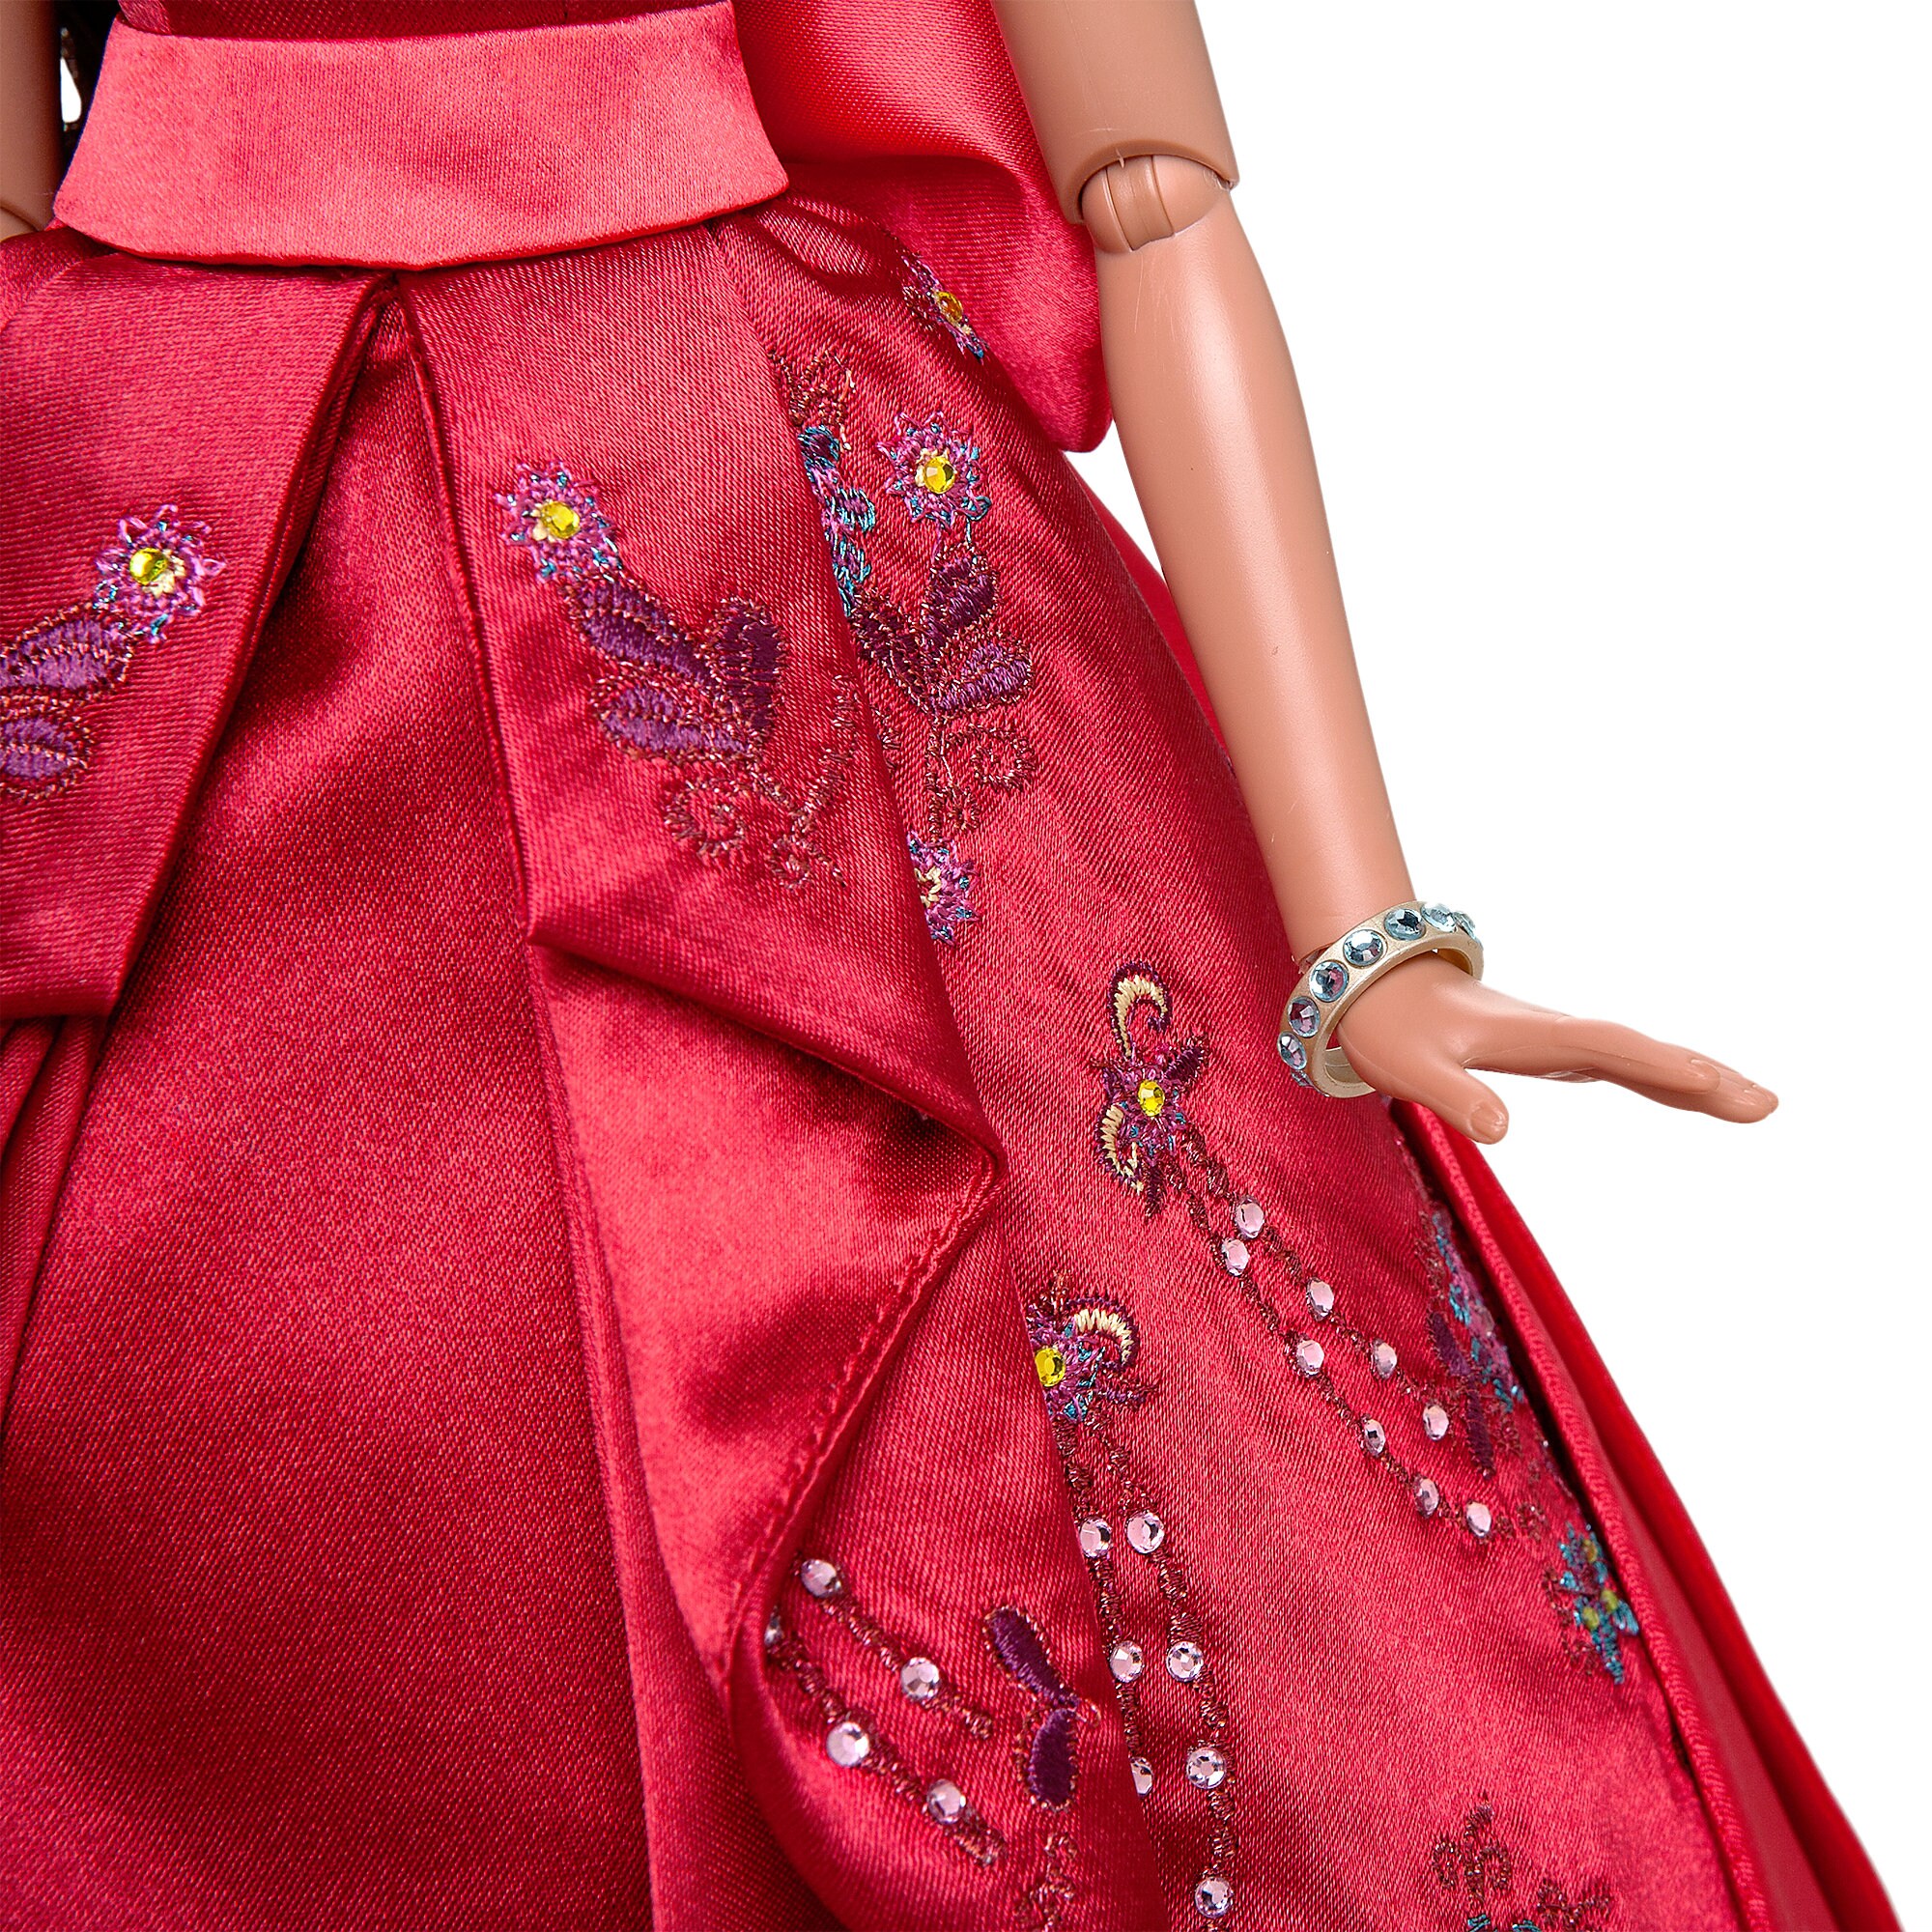 Elena of Avalor Doll - Limited Edition